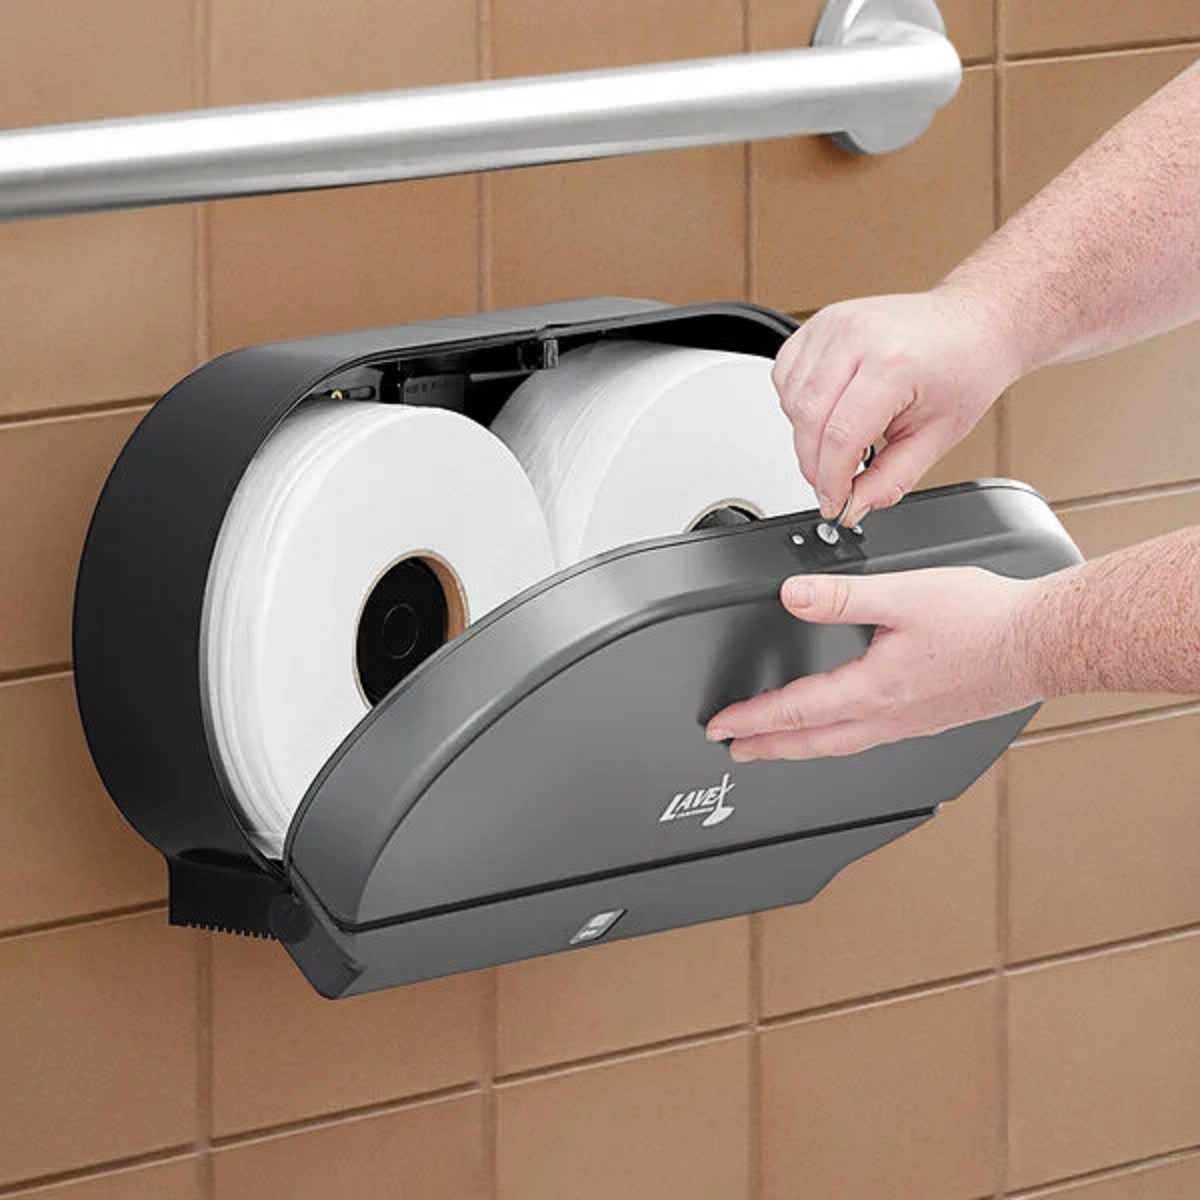 How To Open A Toilet Paper Dispenser